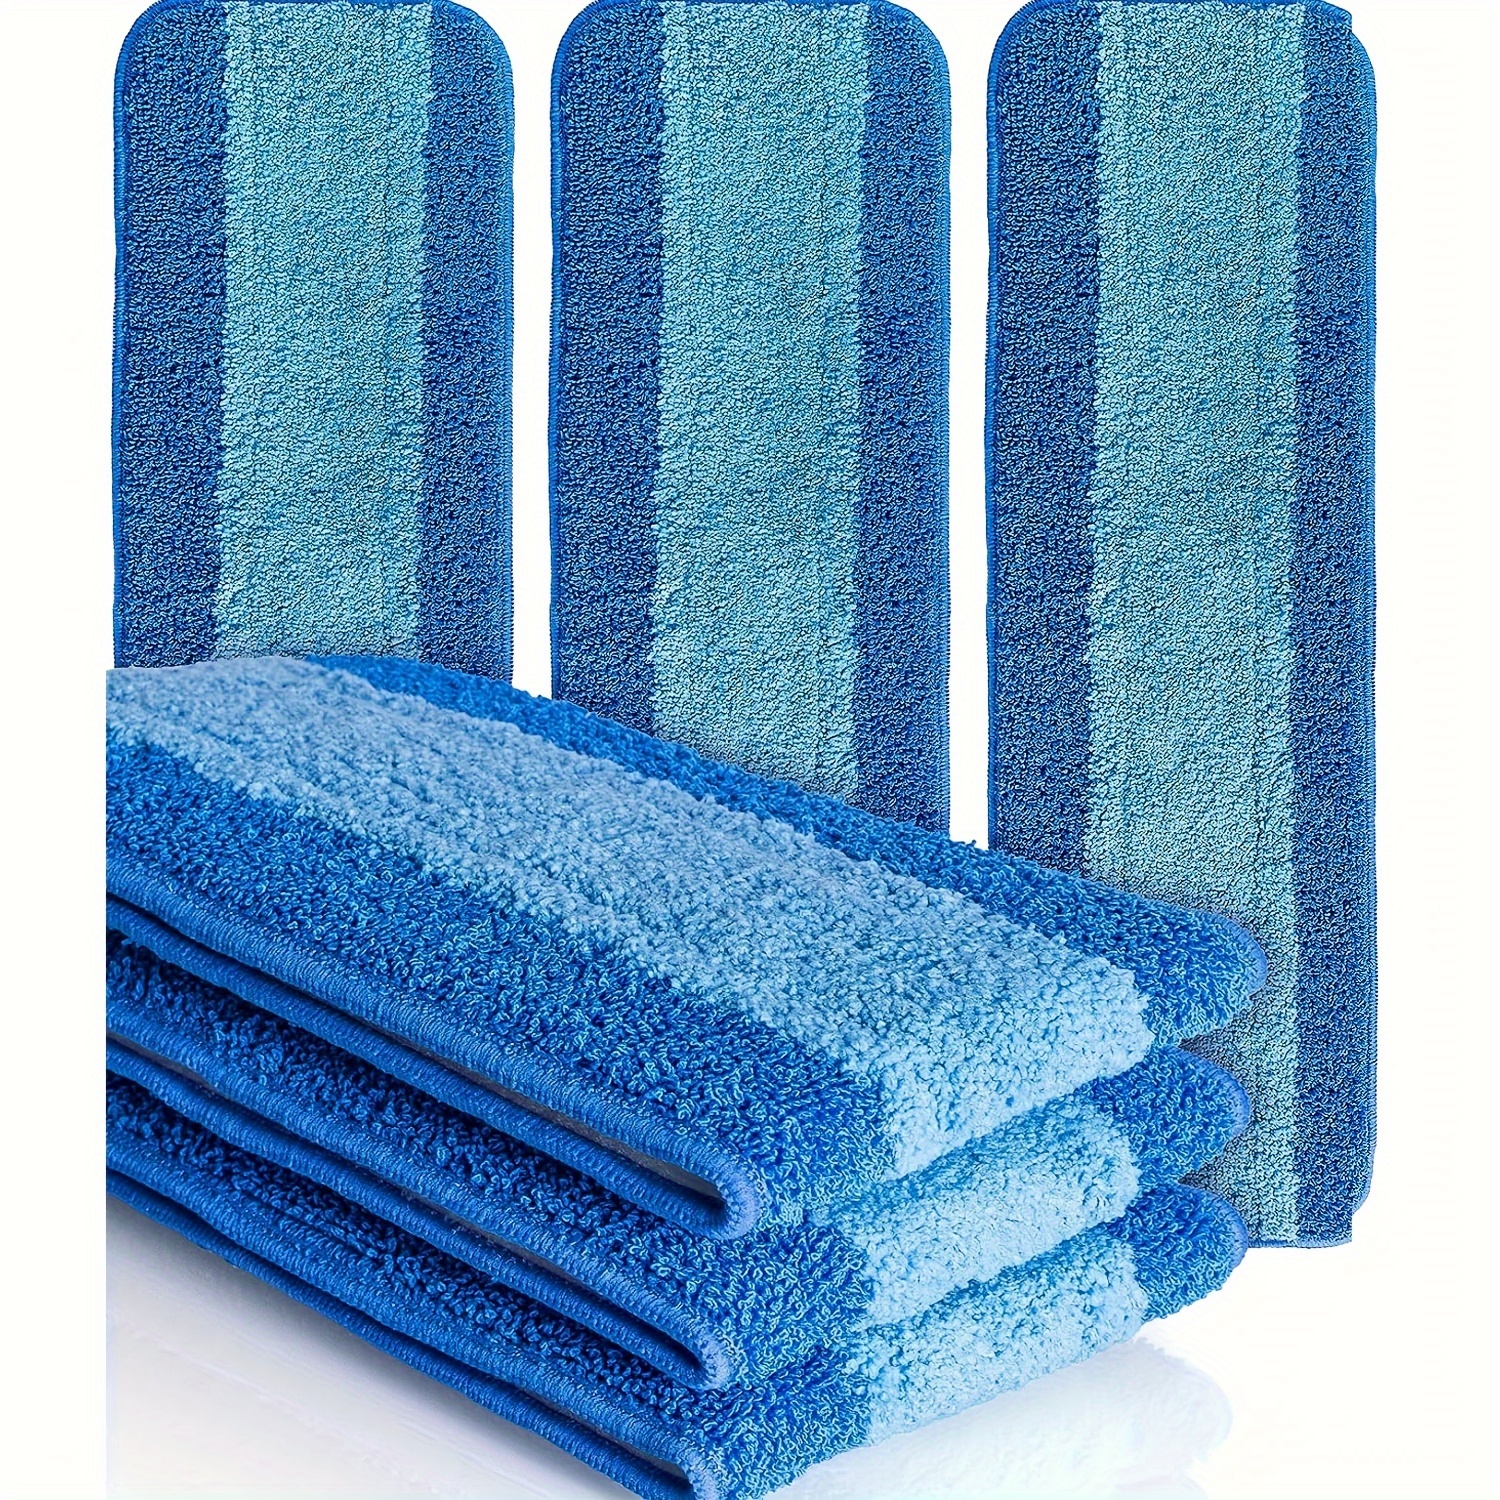 

6pcs, Reusable Mop Replacement Pad, Spray Mop Cloth, Washable And Durable Replacement Mop Cloth, Dust Removal Mop Head, Wet And Dry Use, Easy To Clean, Cleaning Supplies, Christmas Supplies